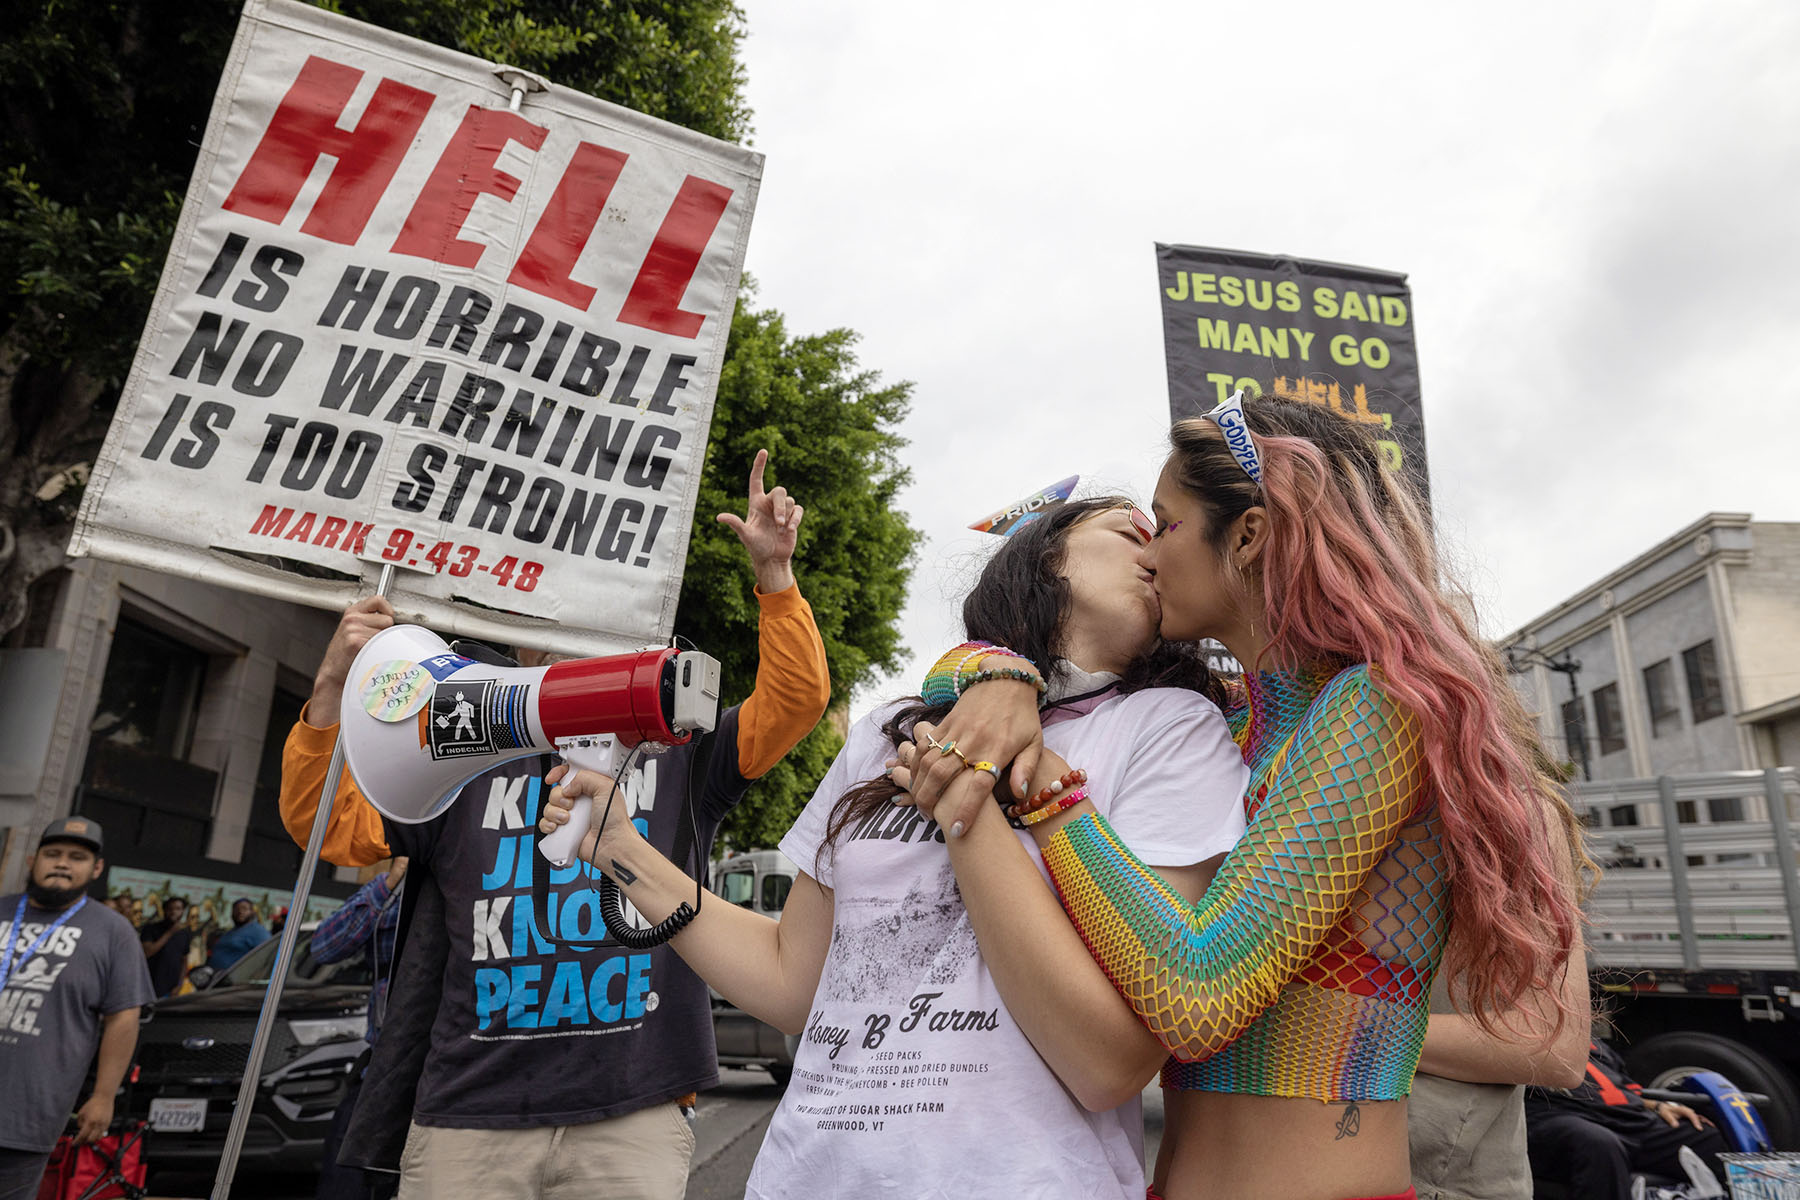 Two women kiss in reaction to confrontational Evangelical Christians condemning the annual LA Pride Parade. Behind them, a protester holds a large panel that reads "Hell is horrible, no warning is too strong!"